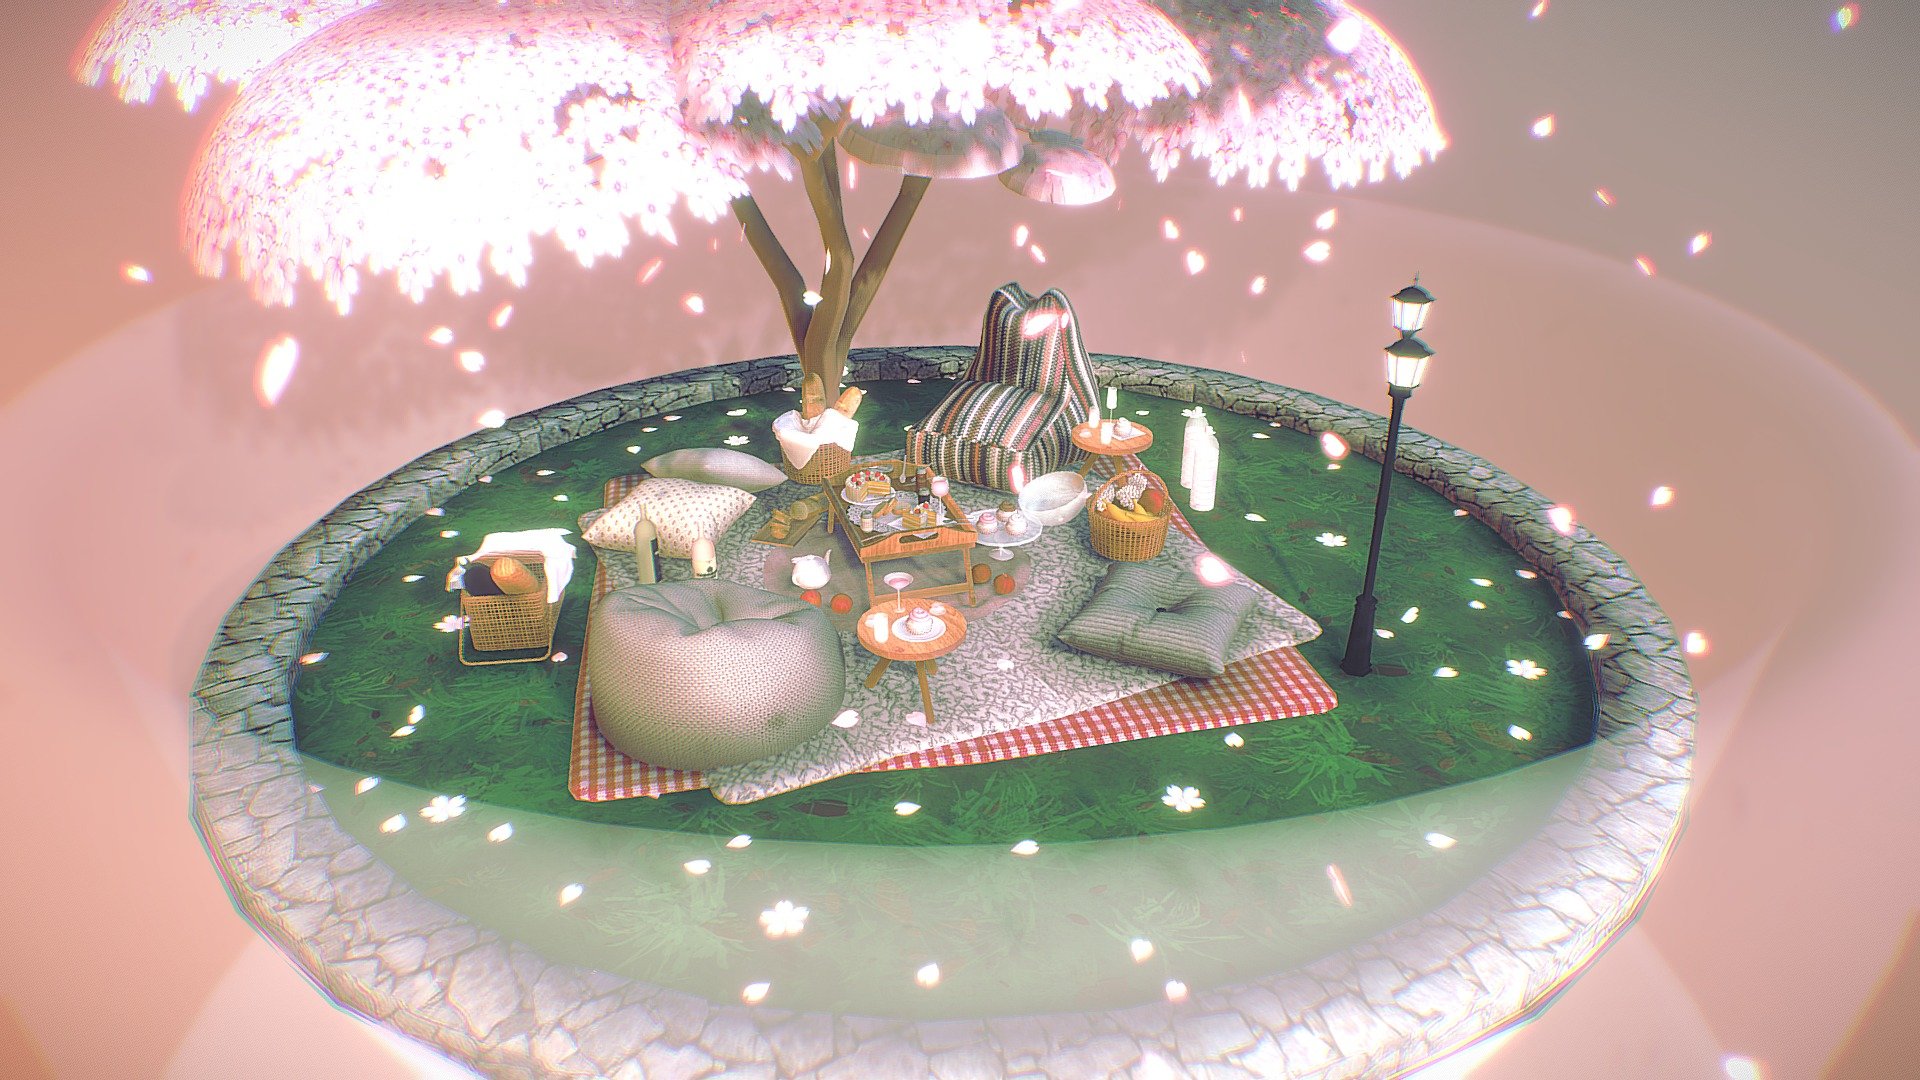 Small and cute spring picnic / Under the cherry blossom tree - Sakura Spring Picnic!! - 3D model by AA (@araland20041) 3d model